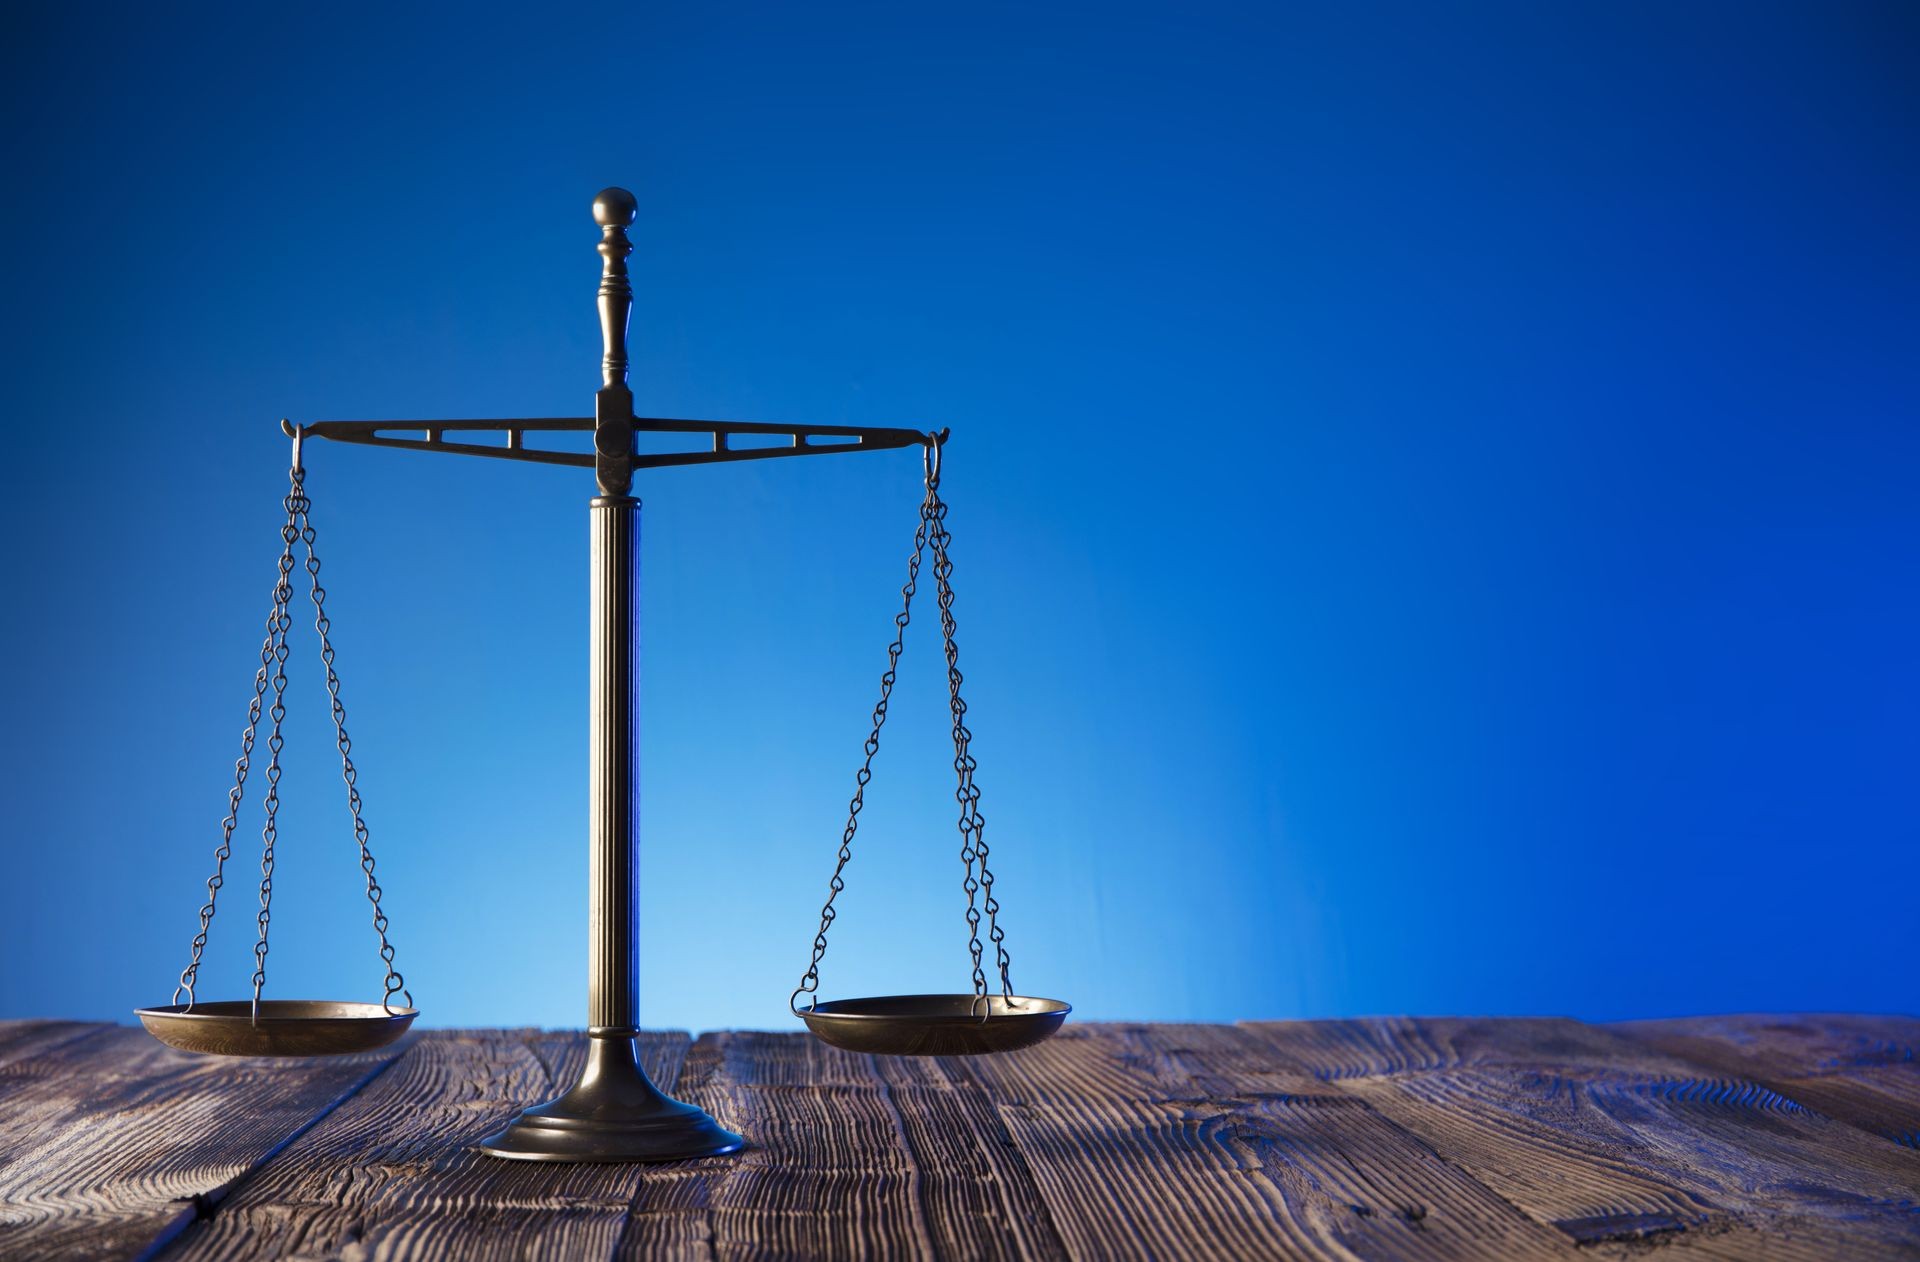 Scales of justice on old wooden table and blue background. Law theme and concept.